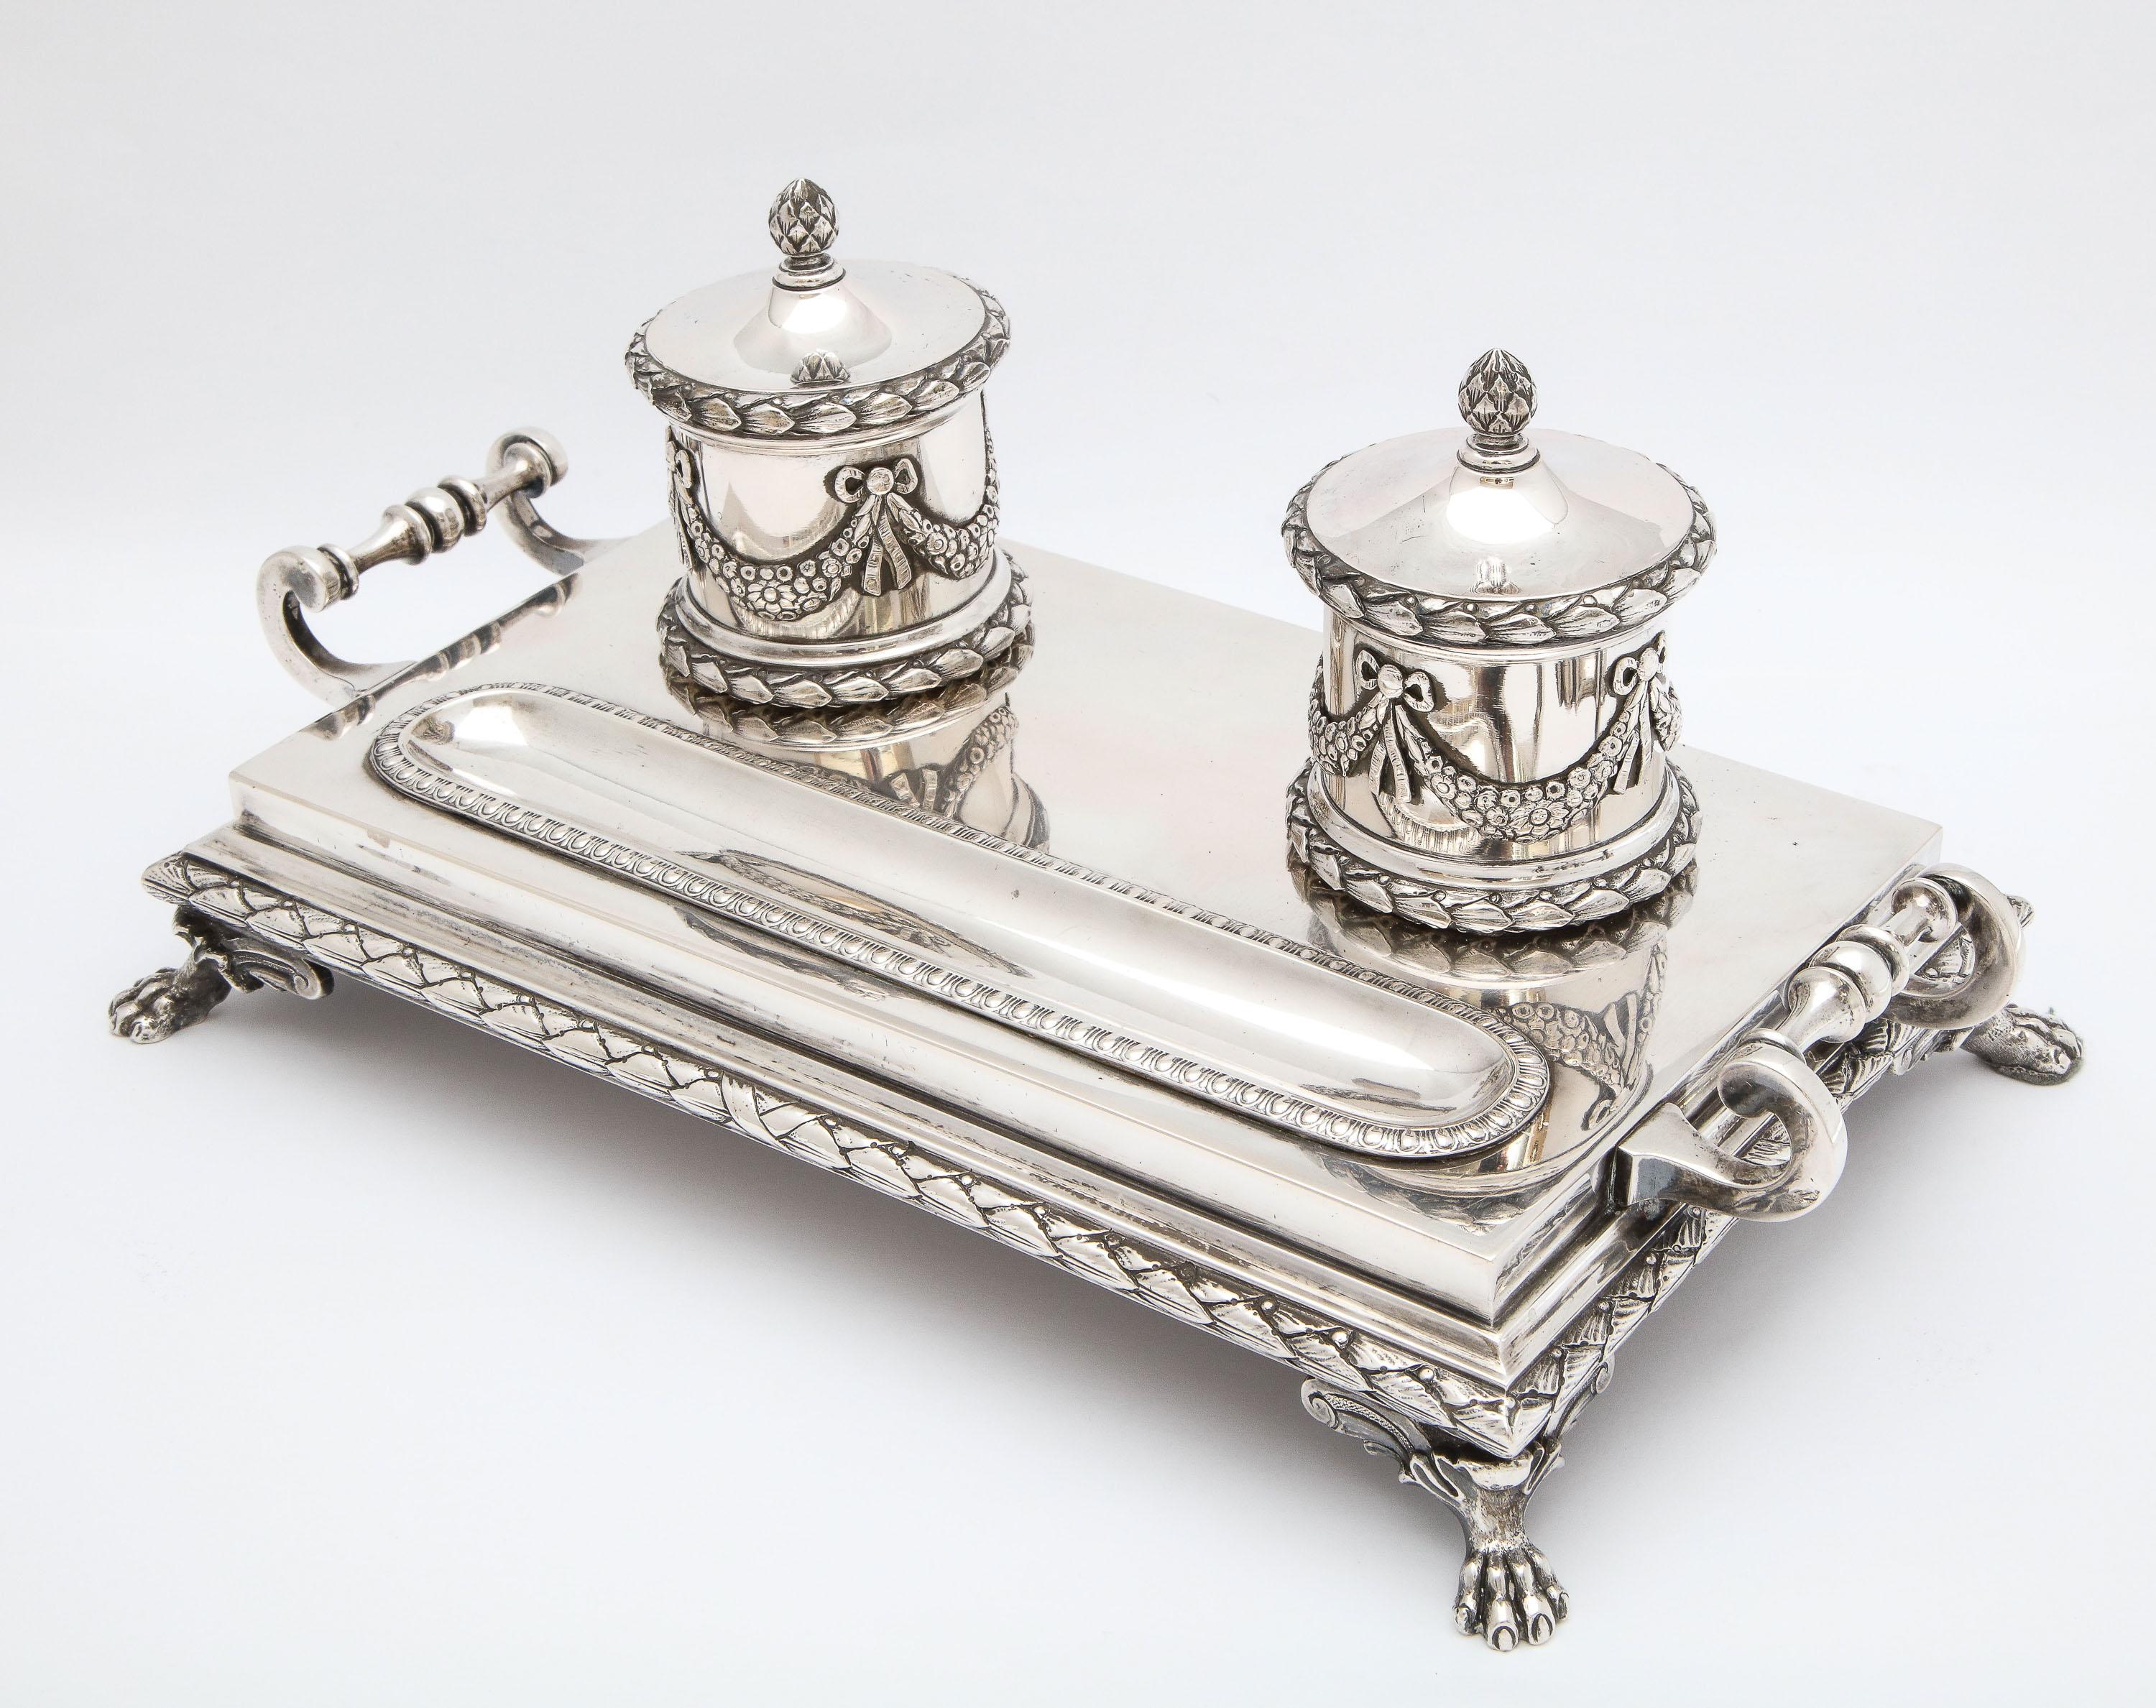 Neoclassical - style, Continental Silver (.800), footed, double inkstand, Denmark, year-hallmarked for 1901, A. N. Dragsted - maker. Each of the wells is decorated with bows and garlands. Measures 10 3/4 inches wide (from handle to handle) x 6